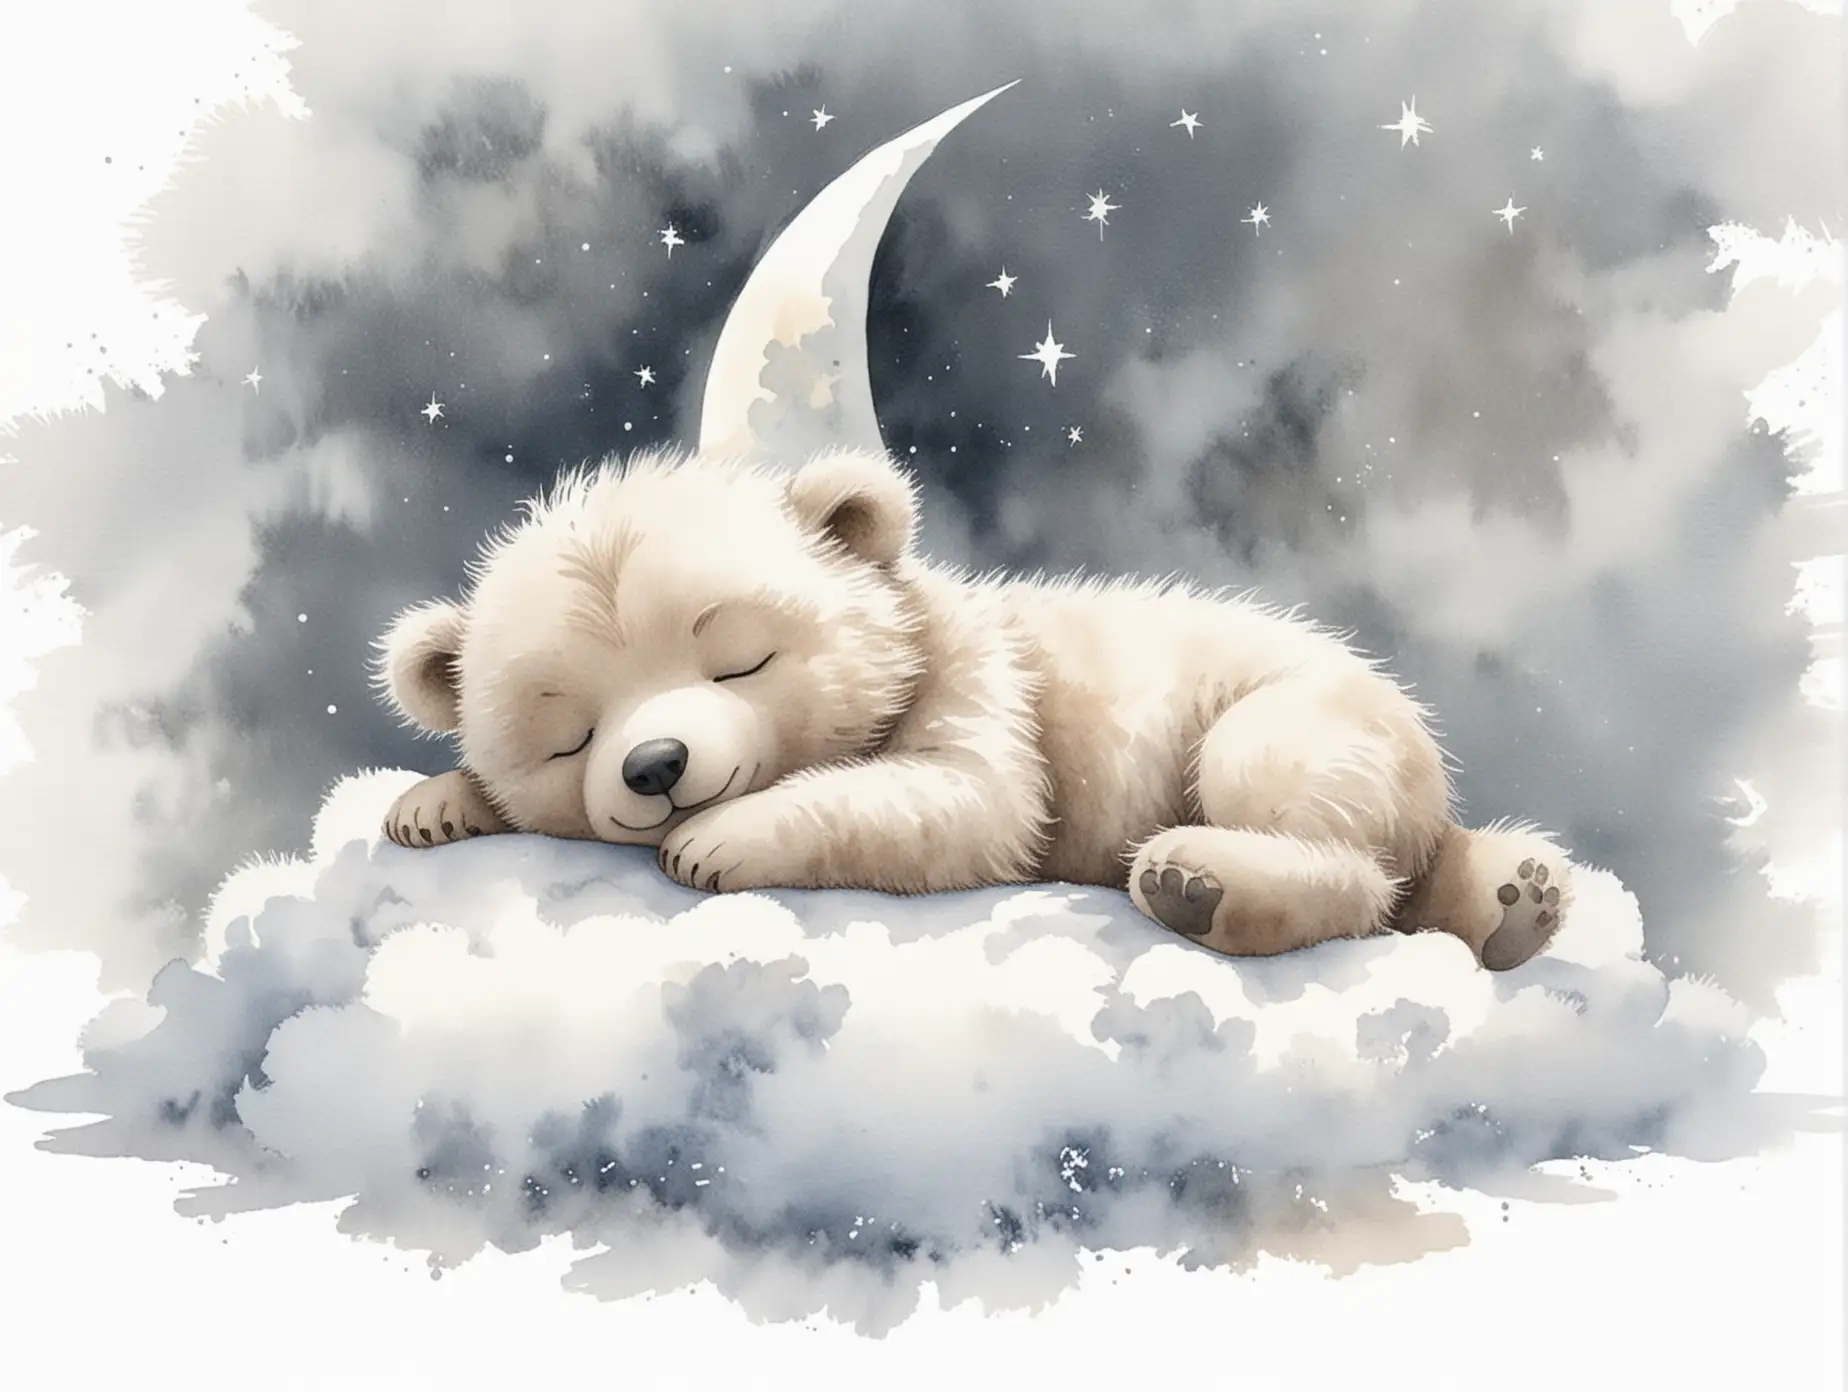 watercolour children's book illustration, muted tones, cute grey-beige little baby teddy bear, sleeping against a cresent moon, bottom resting on a snow white fluffy cloud, isolated on a solid white background